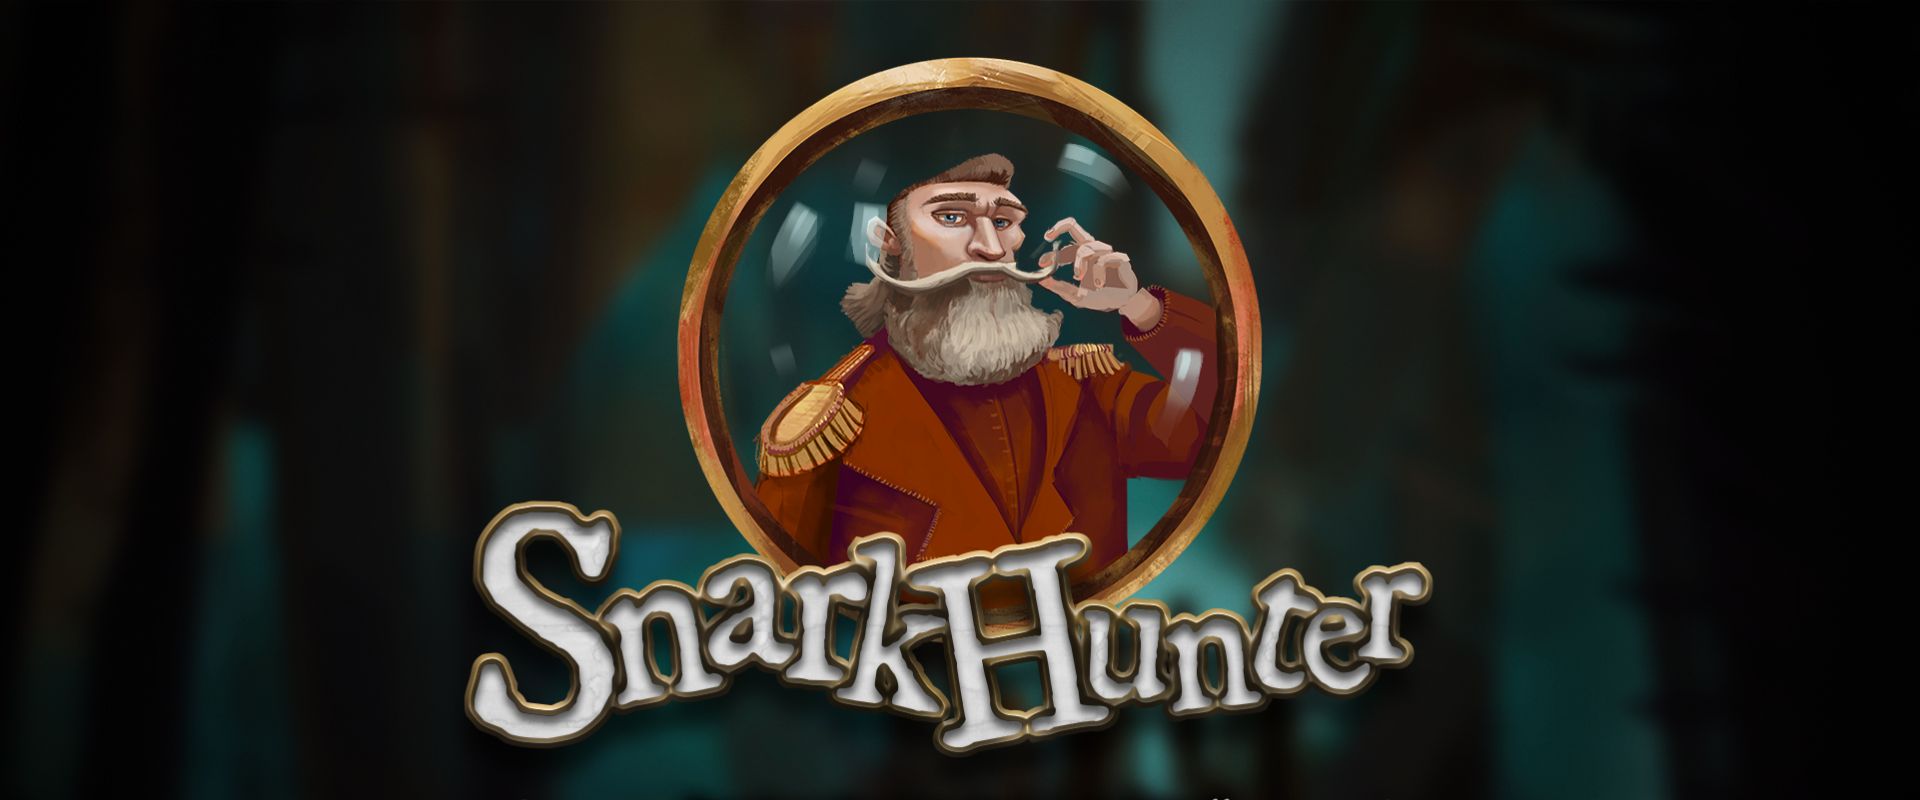 Promo image for Snark Hunter. An illustration of a big bearded man, with a twirly moustache. Snark Hunter written underneath.